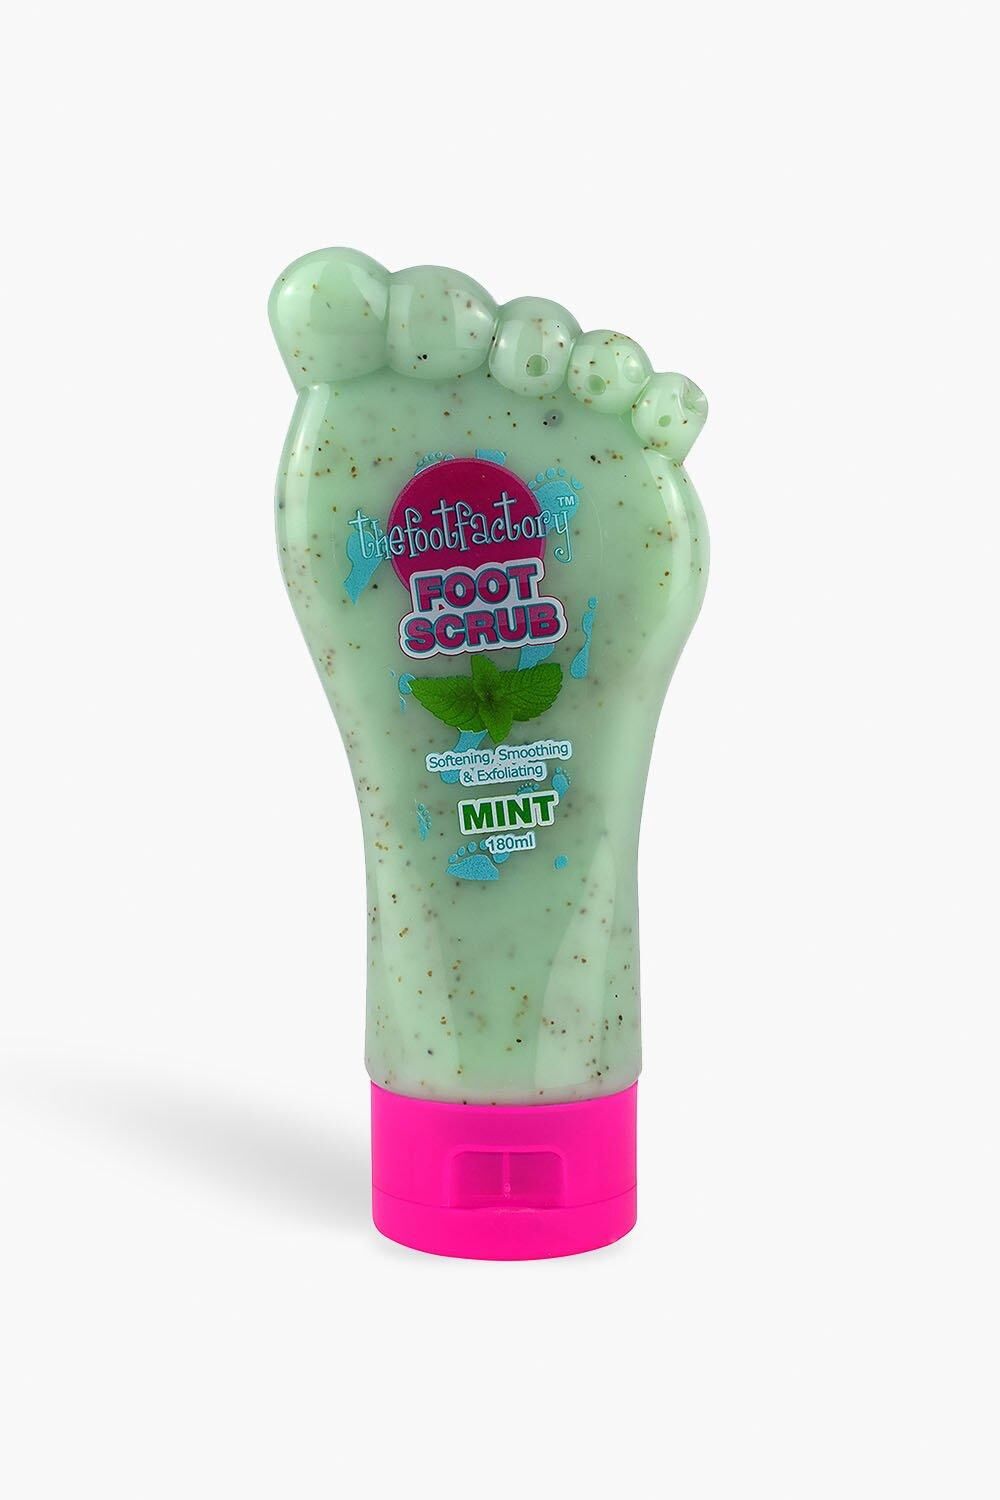 Boohoo The Foot Factory Foot Scrub - Peppermint- White  - Size: ONE SIZE